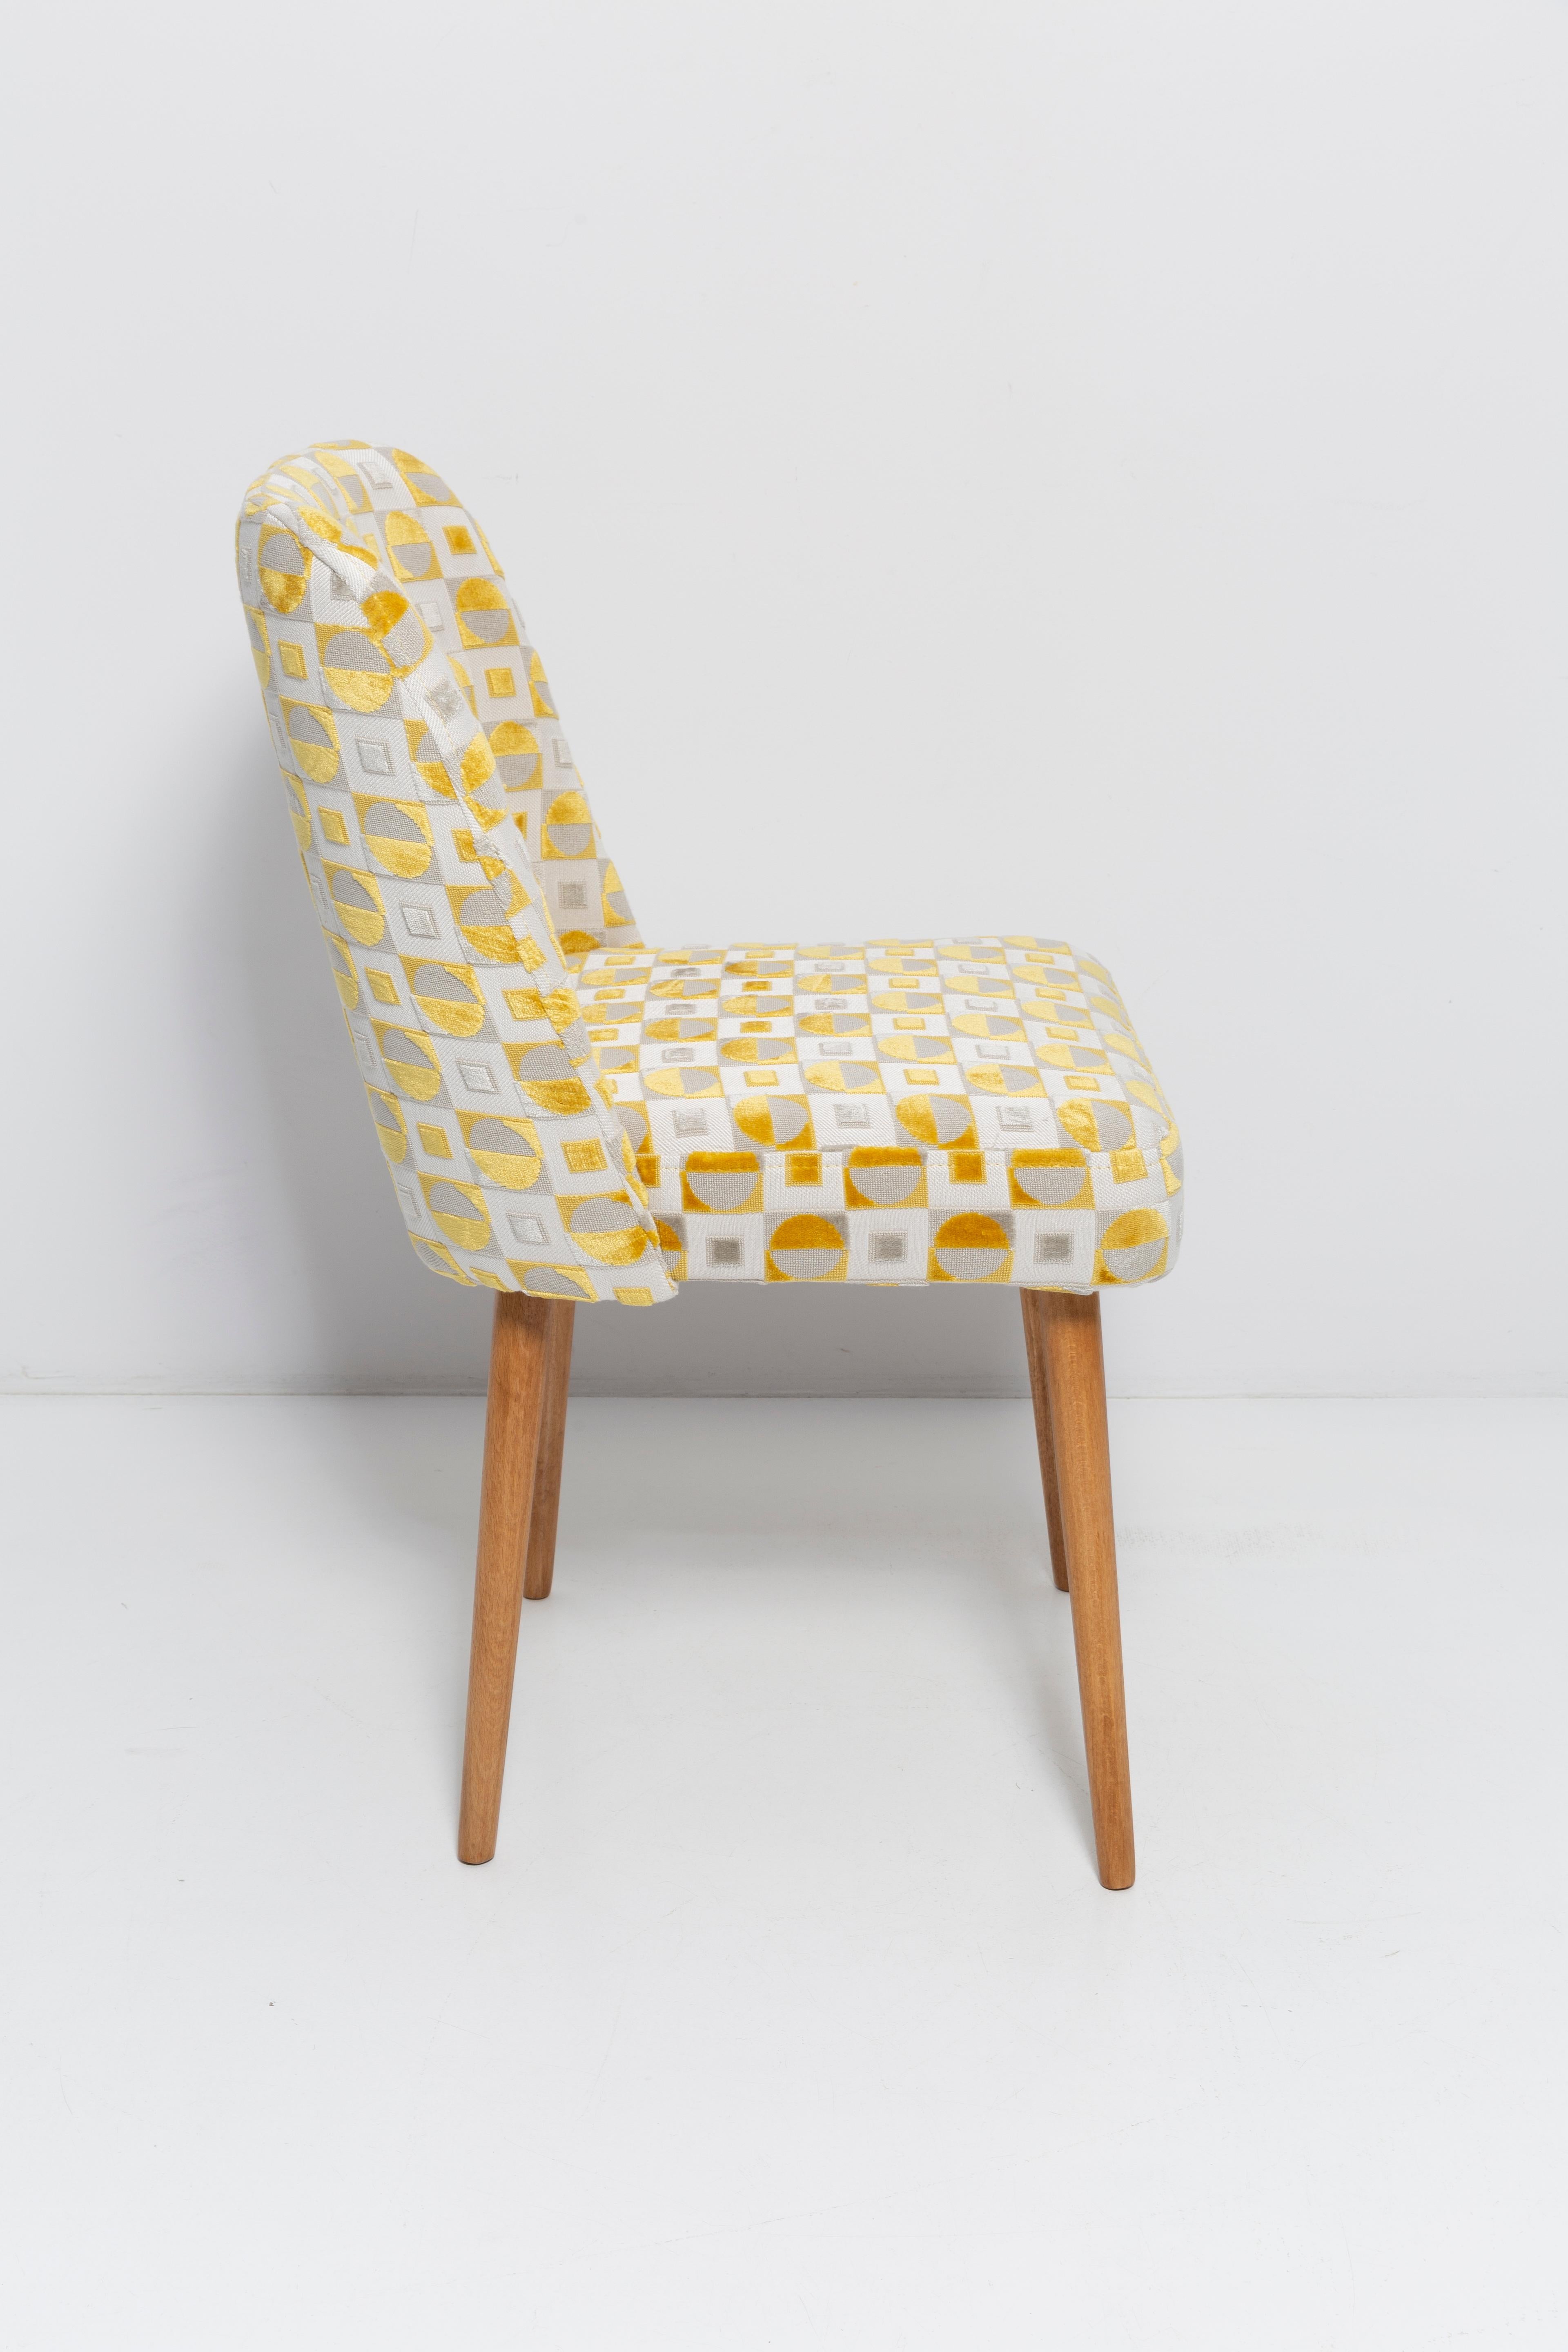 Hand-Crafted Mid-Century Yellow Mustard 'Shell' Chair, 1960s For Sale